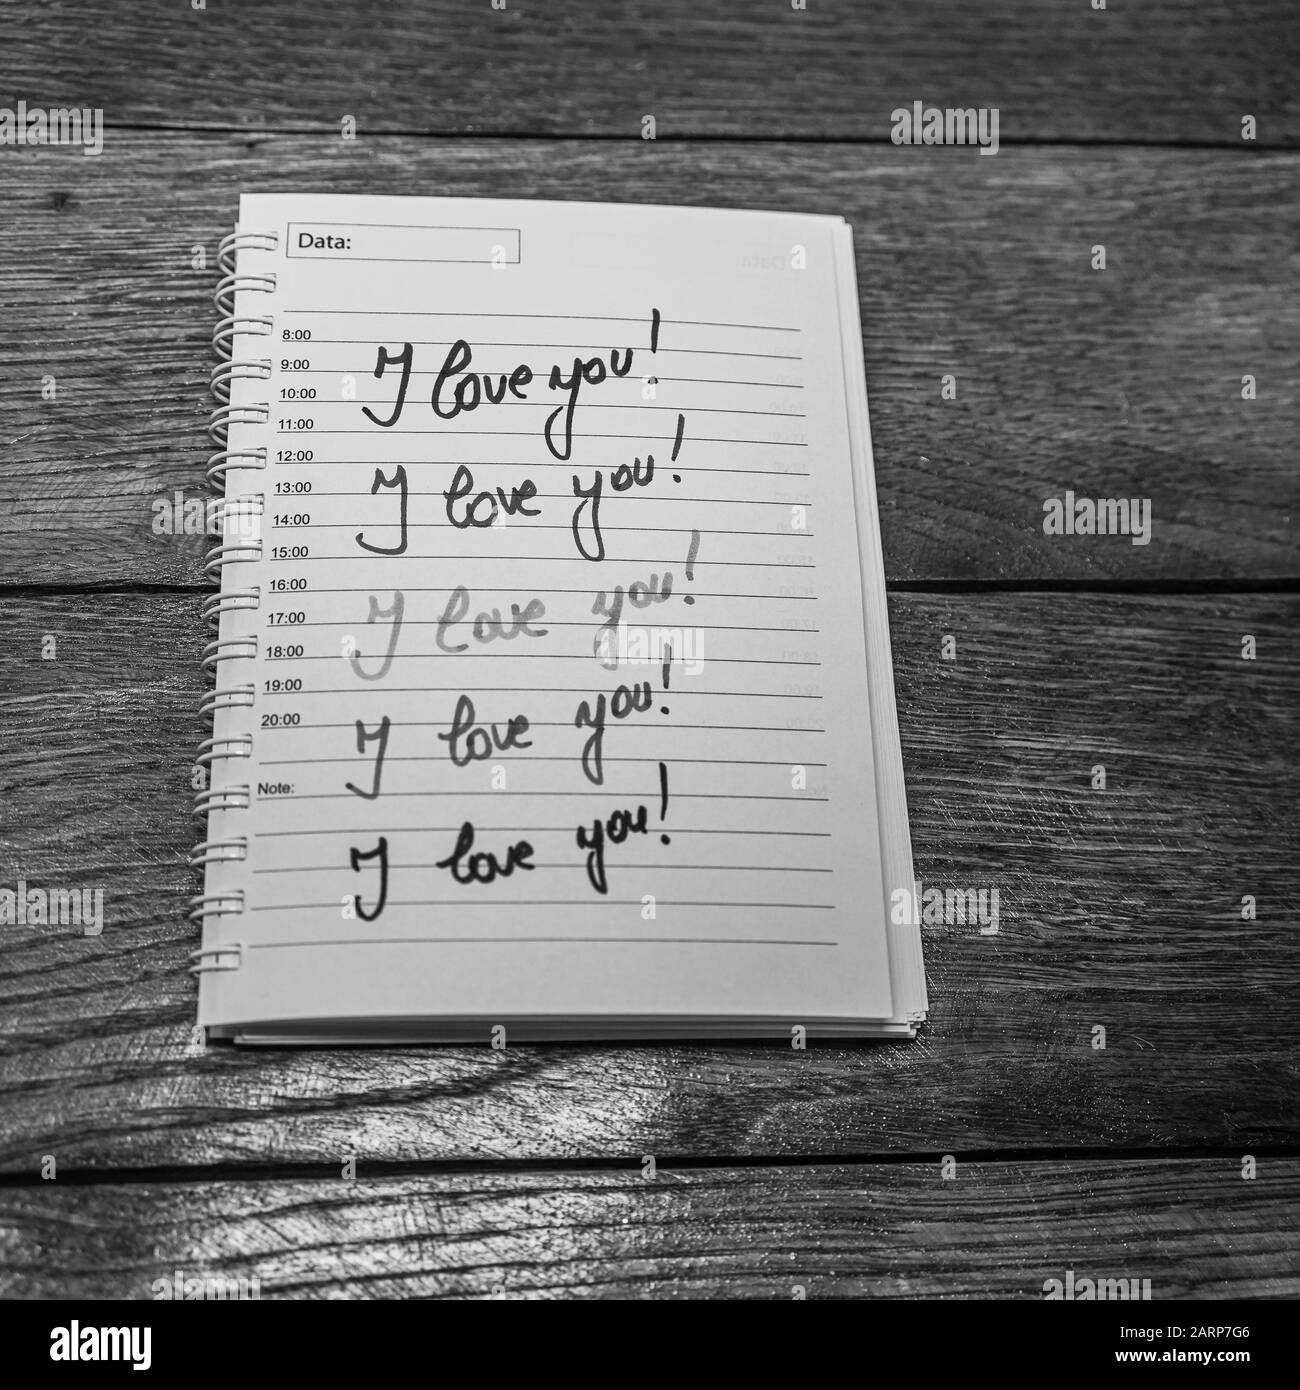 I love you, writing love text on paper, lovely message. Text on ...